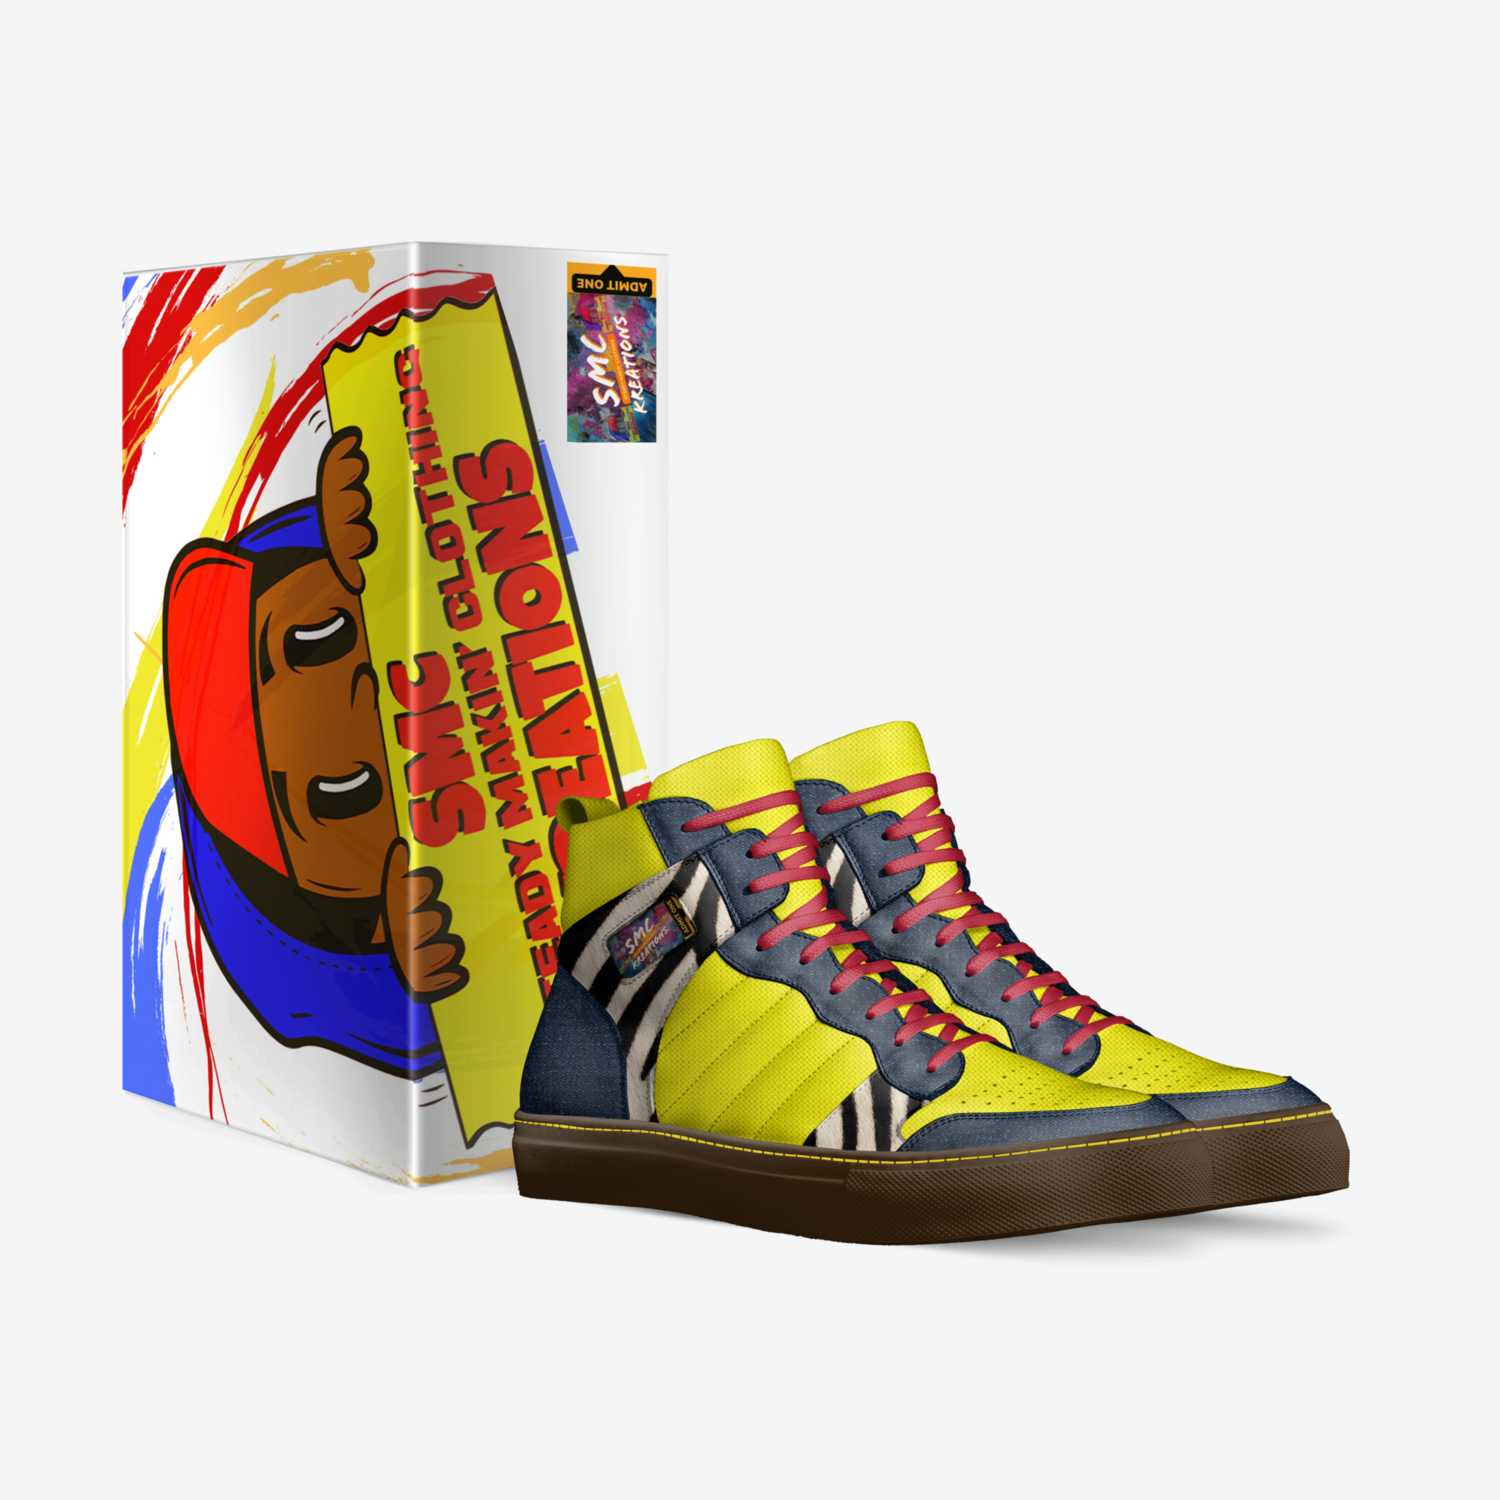 Sheriff Woody custom made in Italy shoes by Shawn Mcnair | Box view